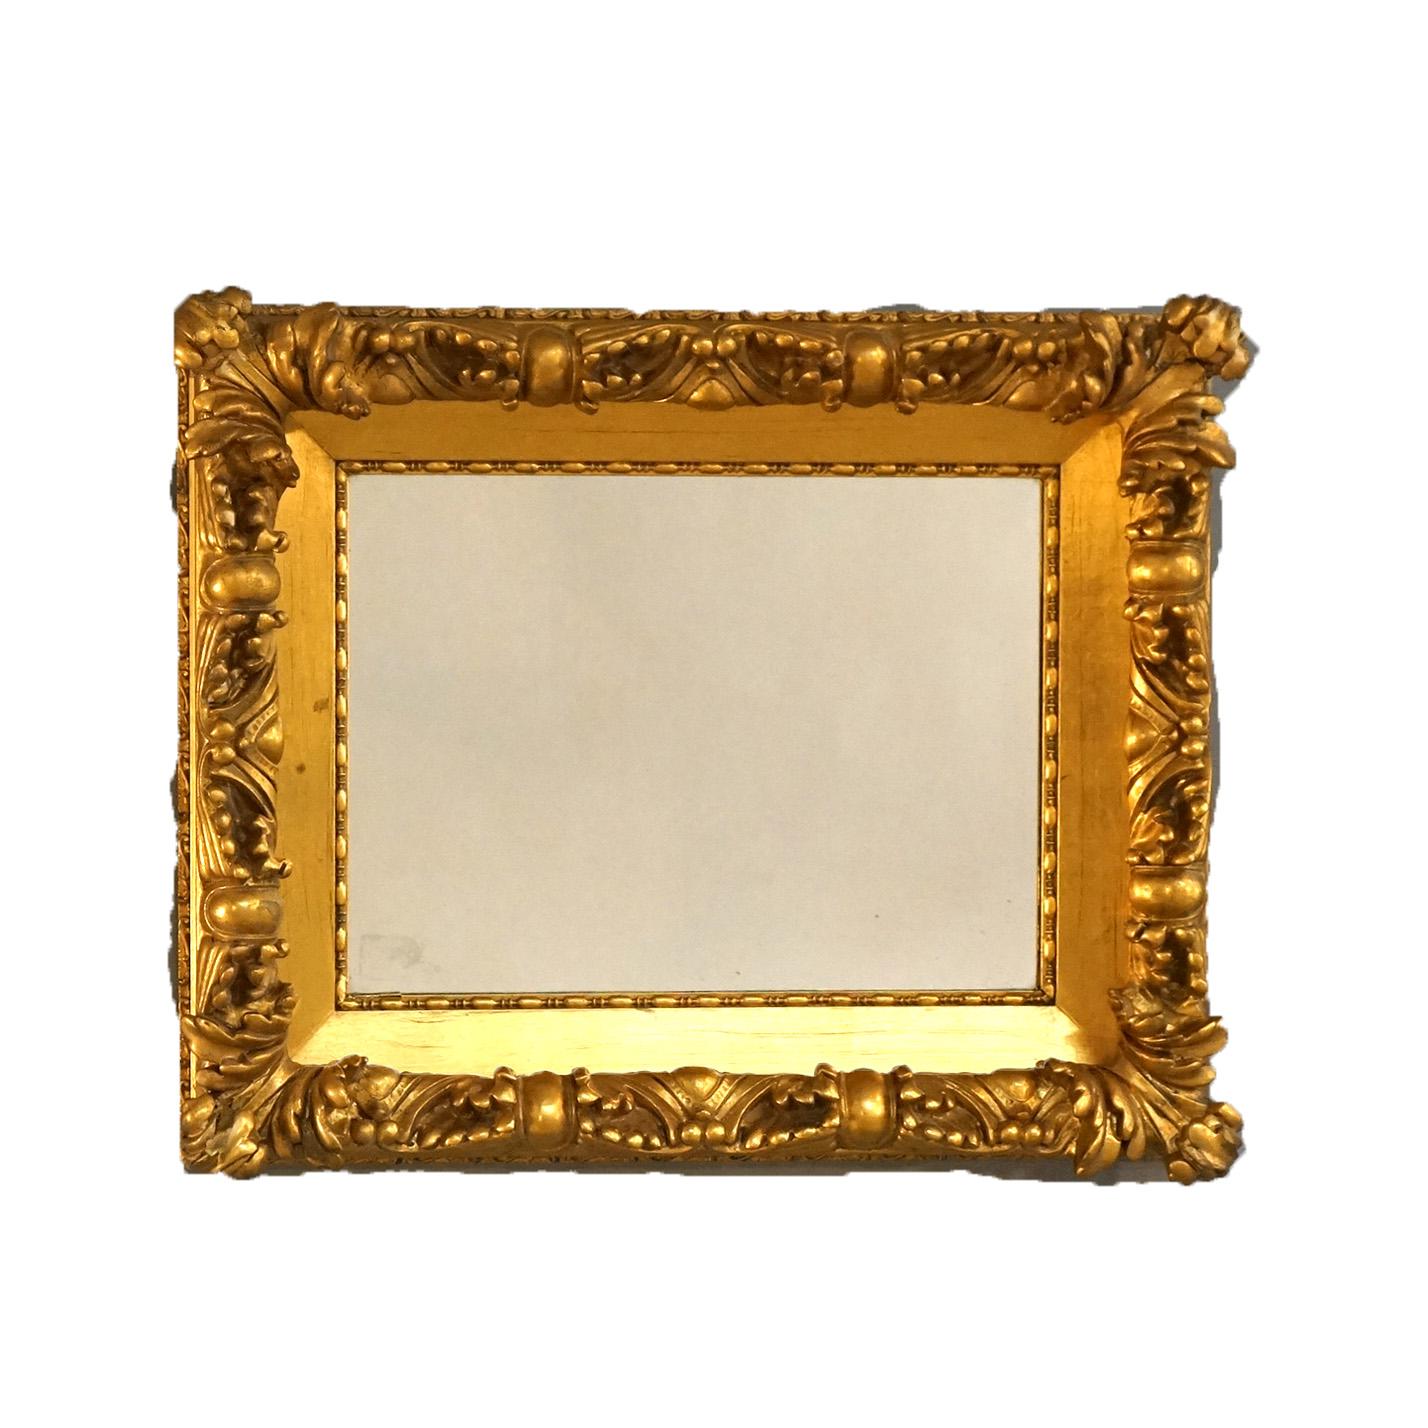 Antique Victorian Foliate Carved Giltwood Framed Wall Mirror C1890

Measures- 17.75''H x 21.5''W x 3.75''D; 14.5'' x 10.75'' sight